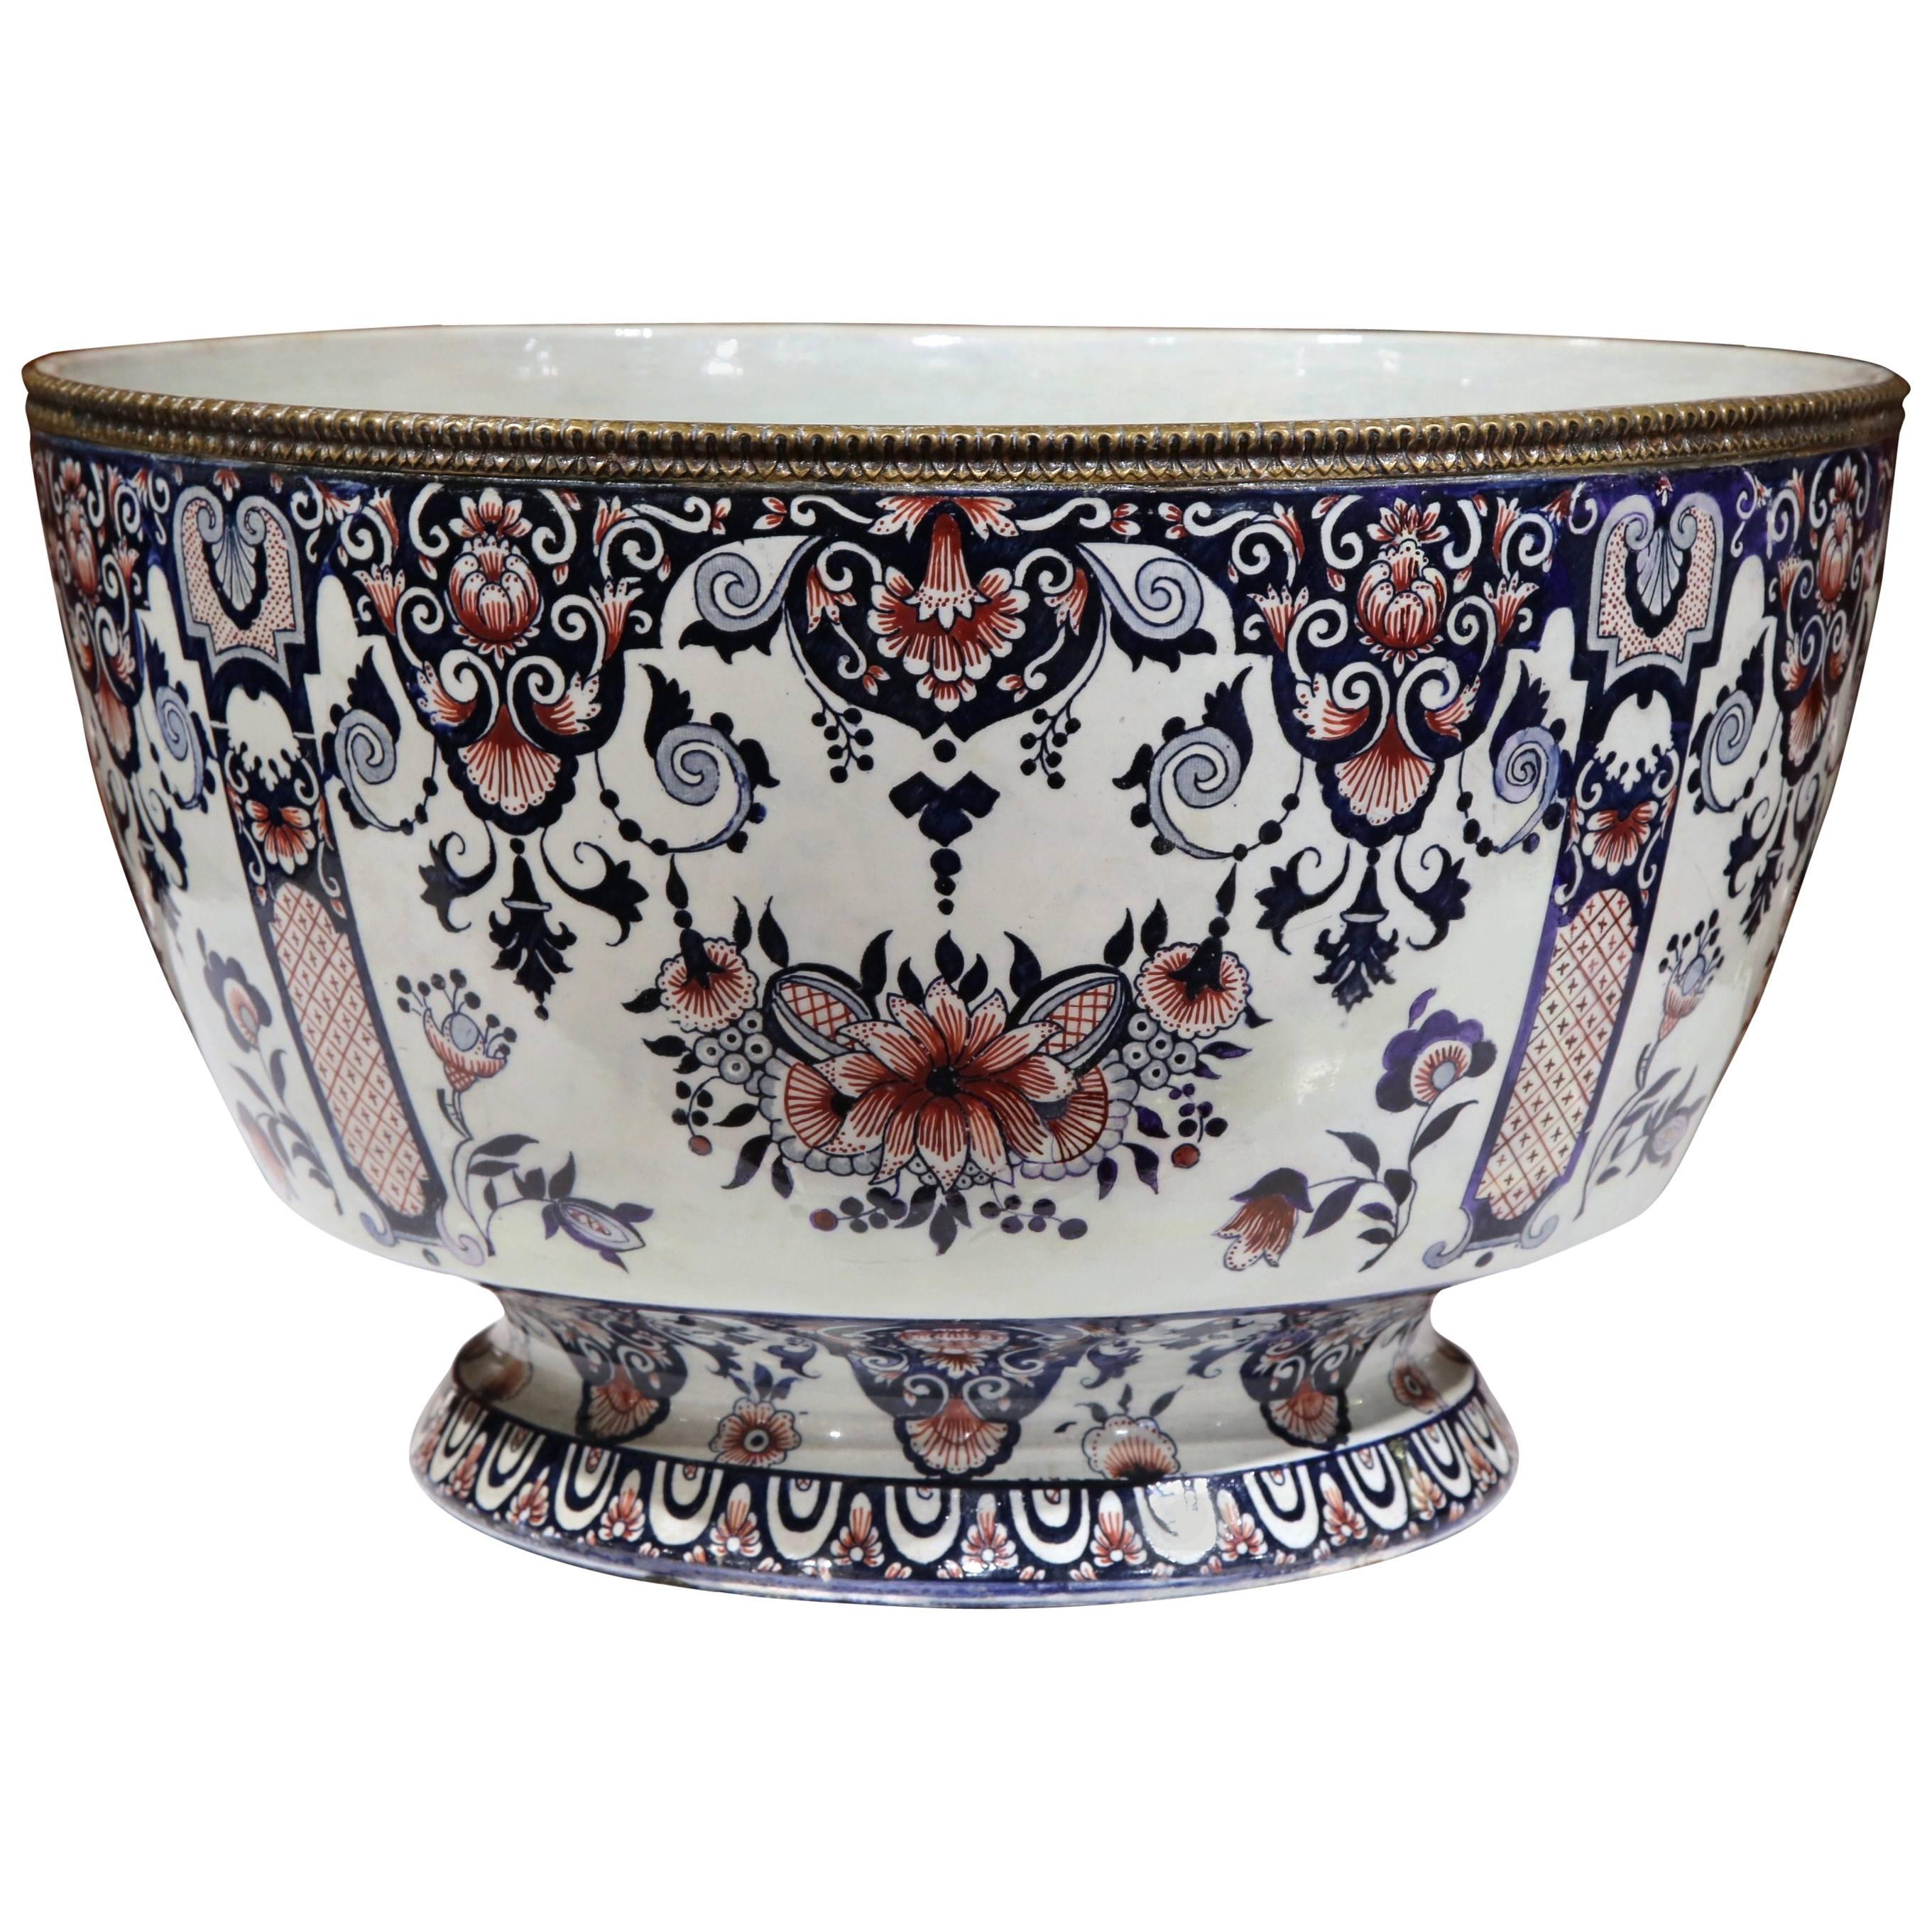 19th Century French Hand-Painted Faience Cache Pot from Gien